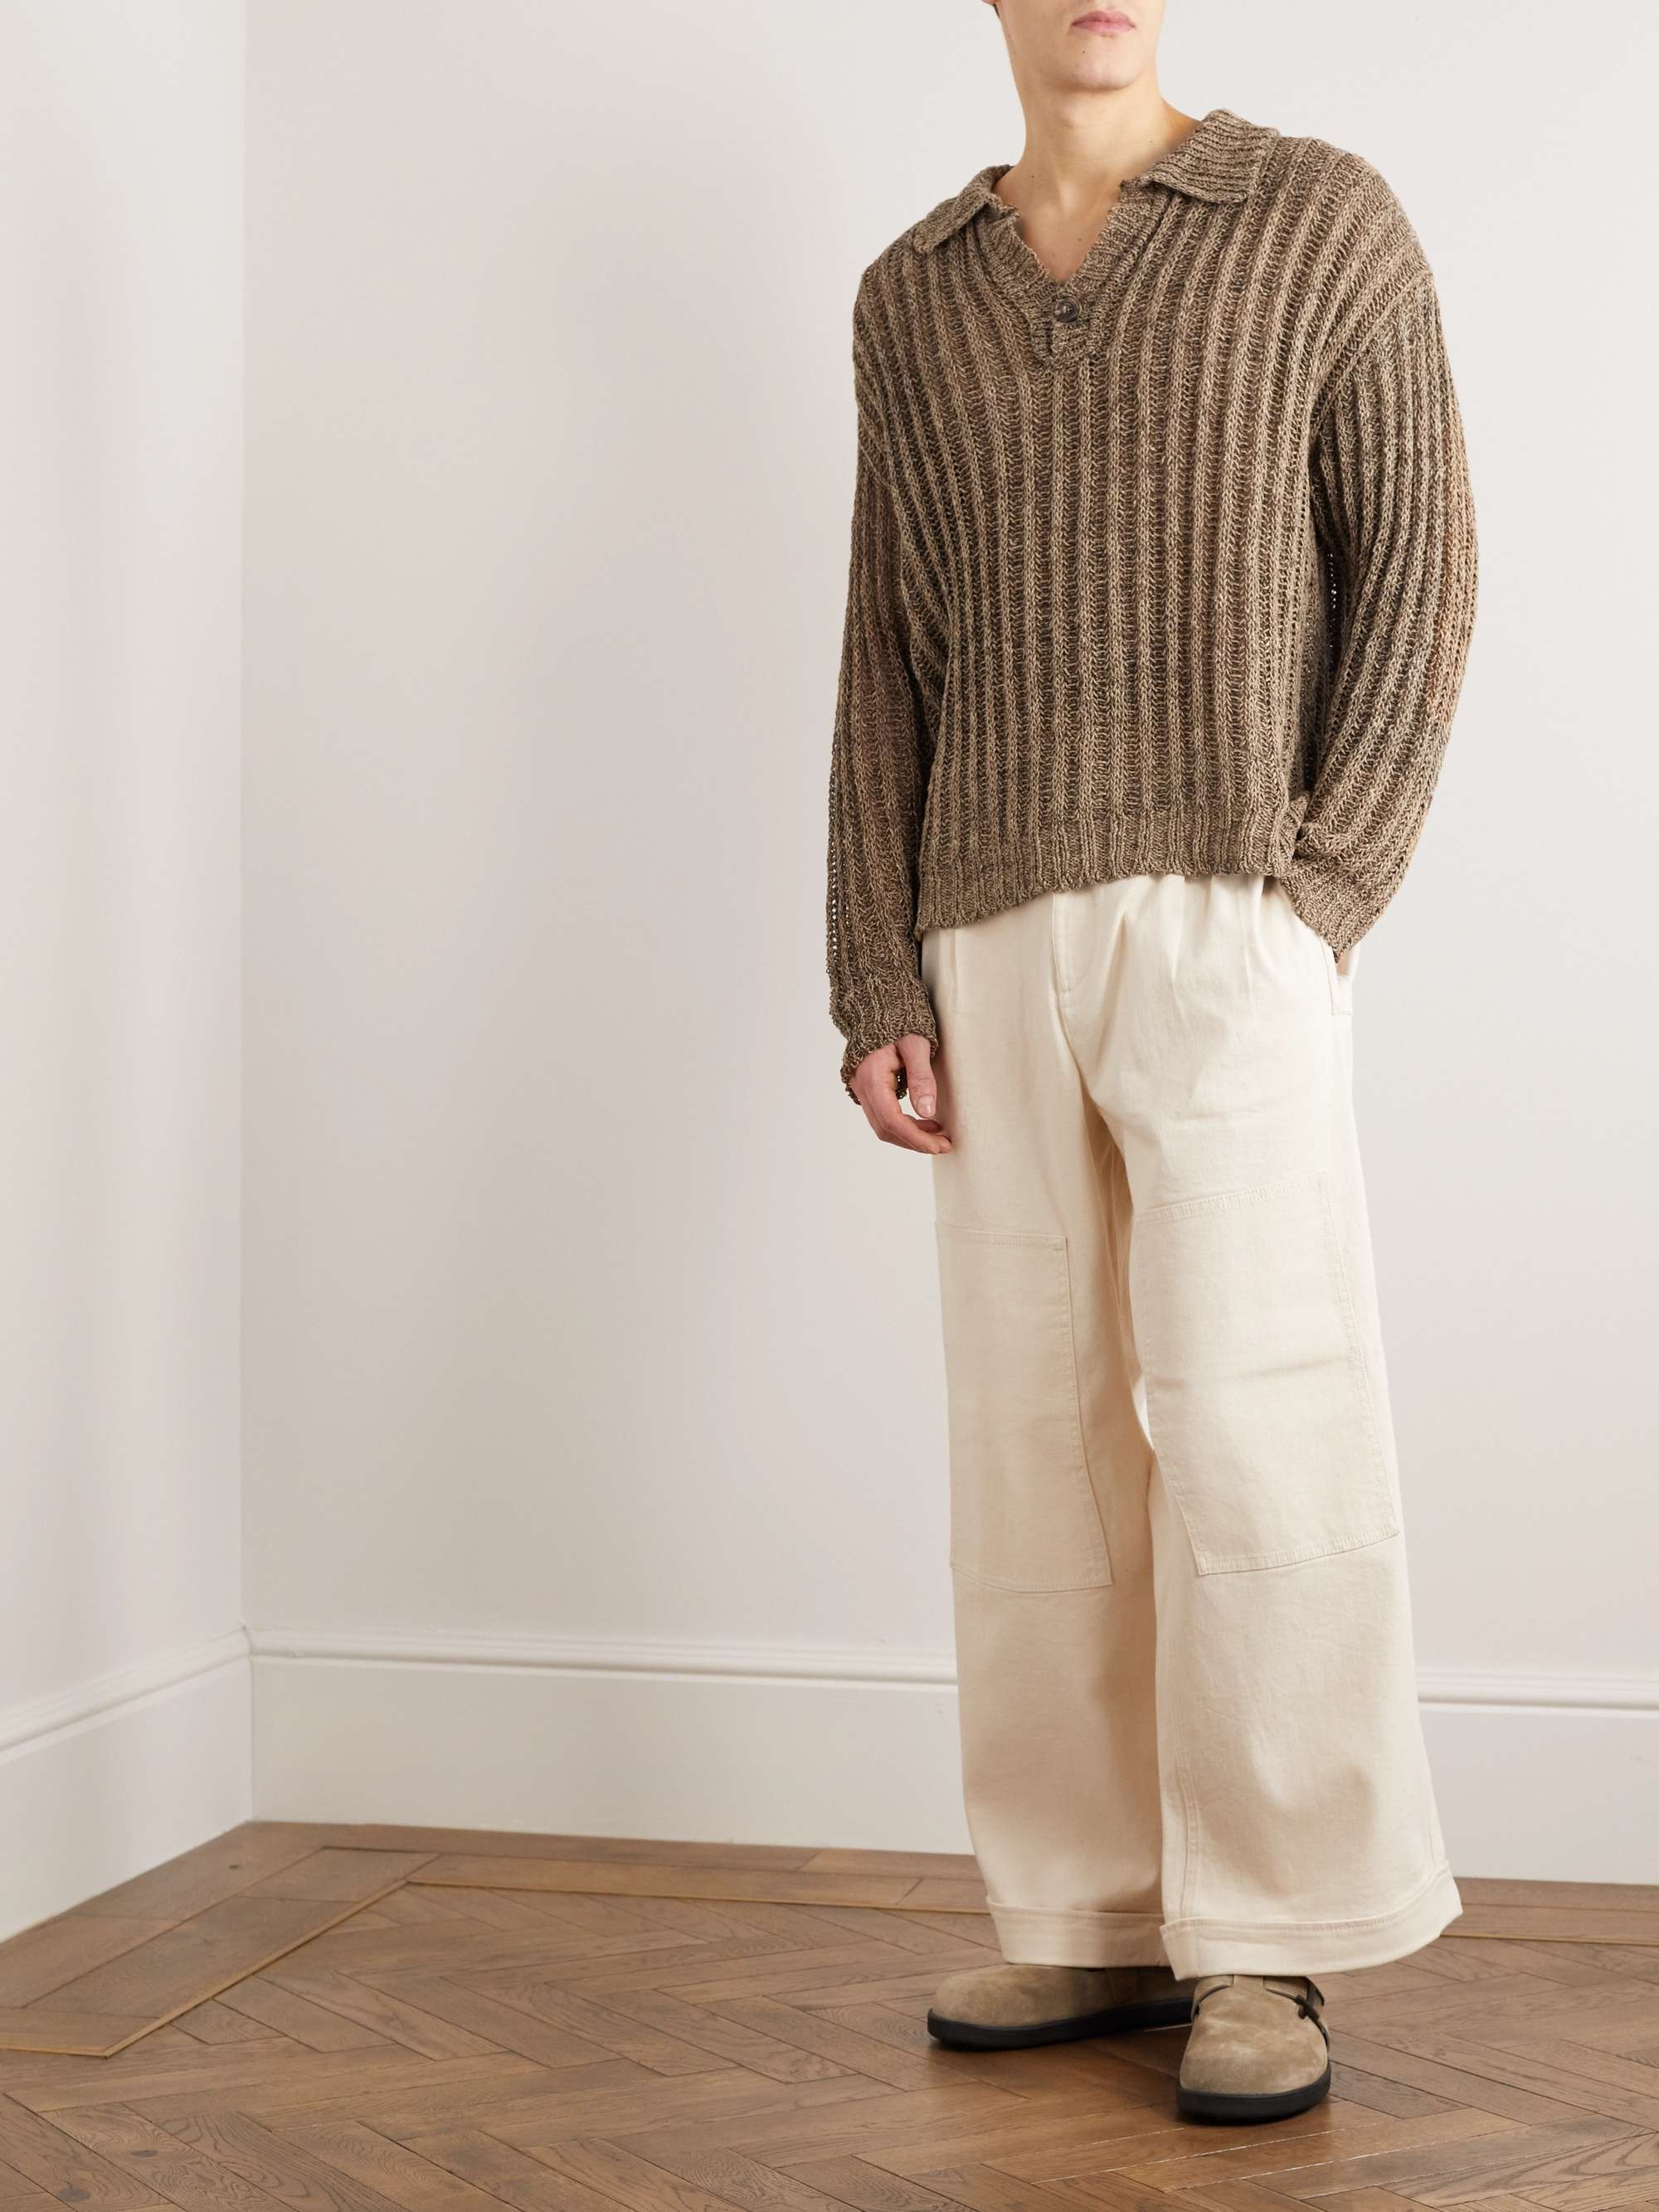 ETRO Ribbed Open-Knit Linen, Cotton and Silk-Blend Sweater